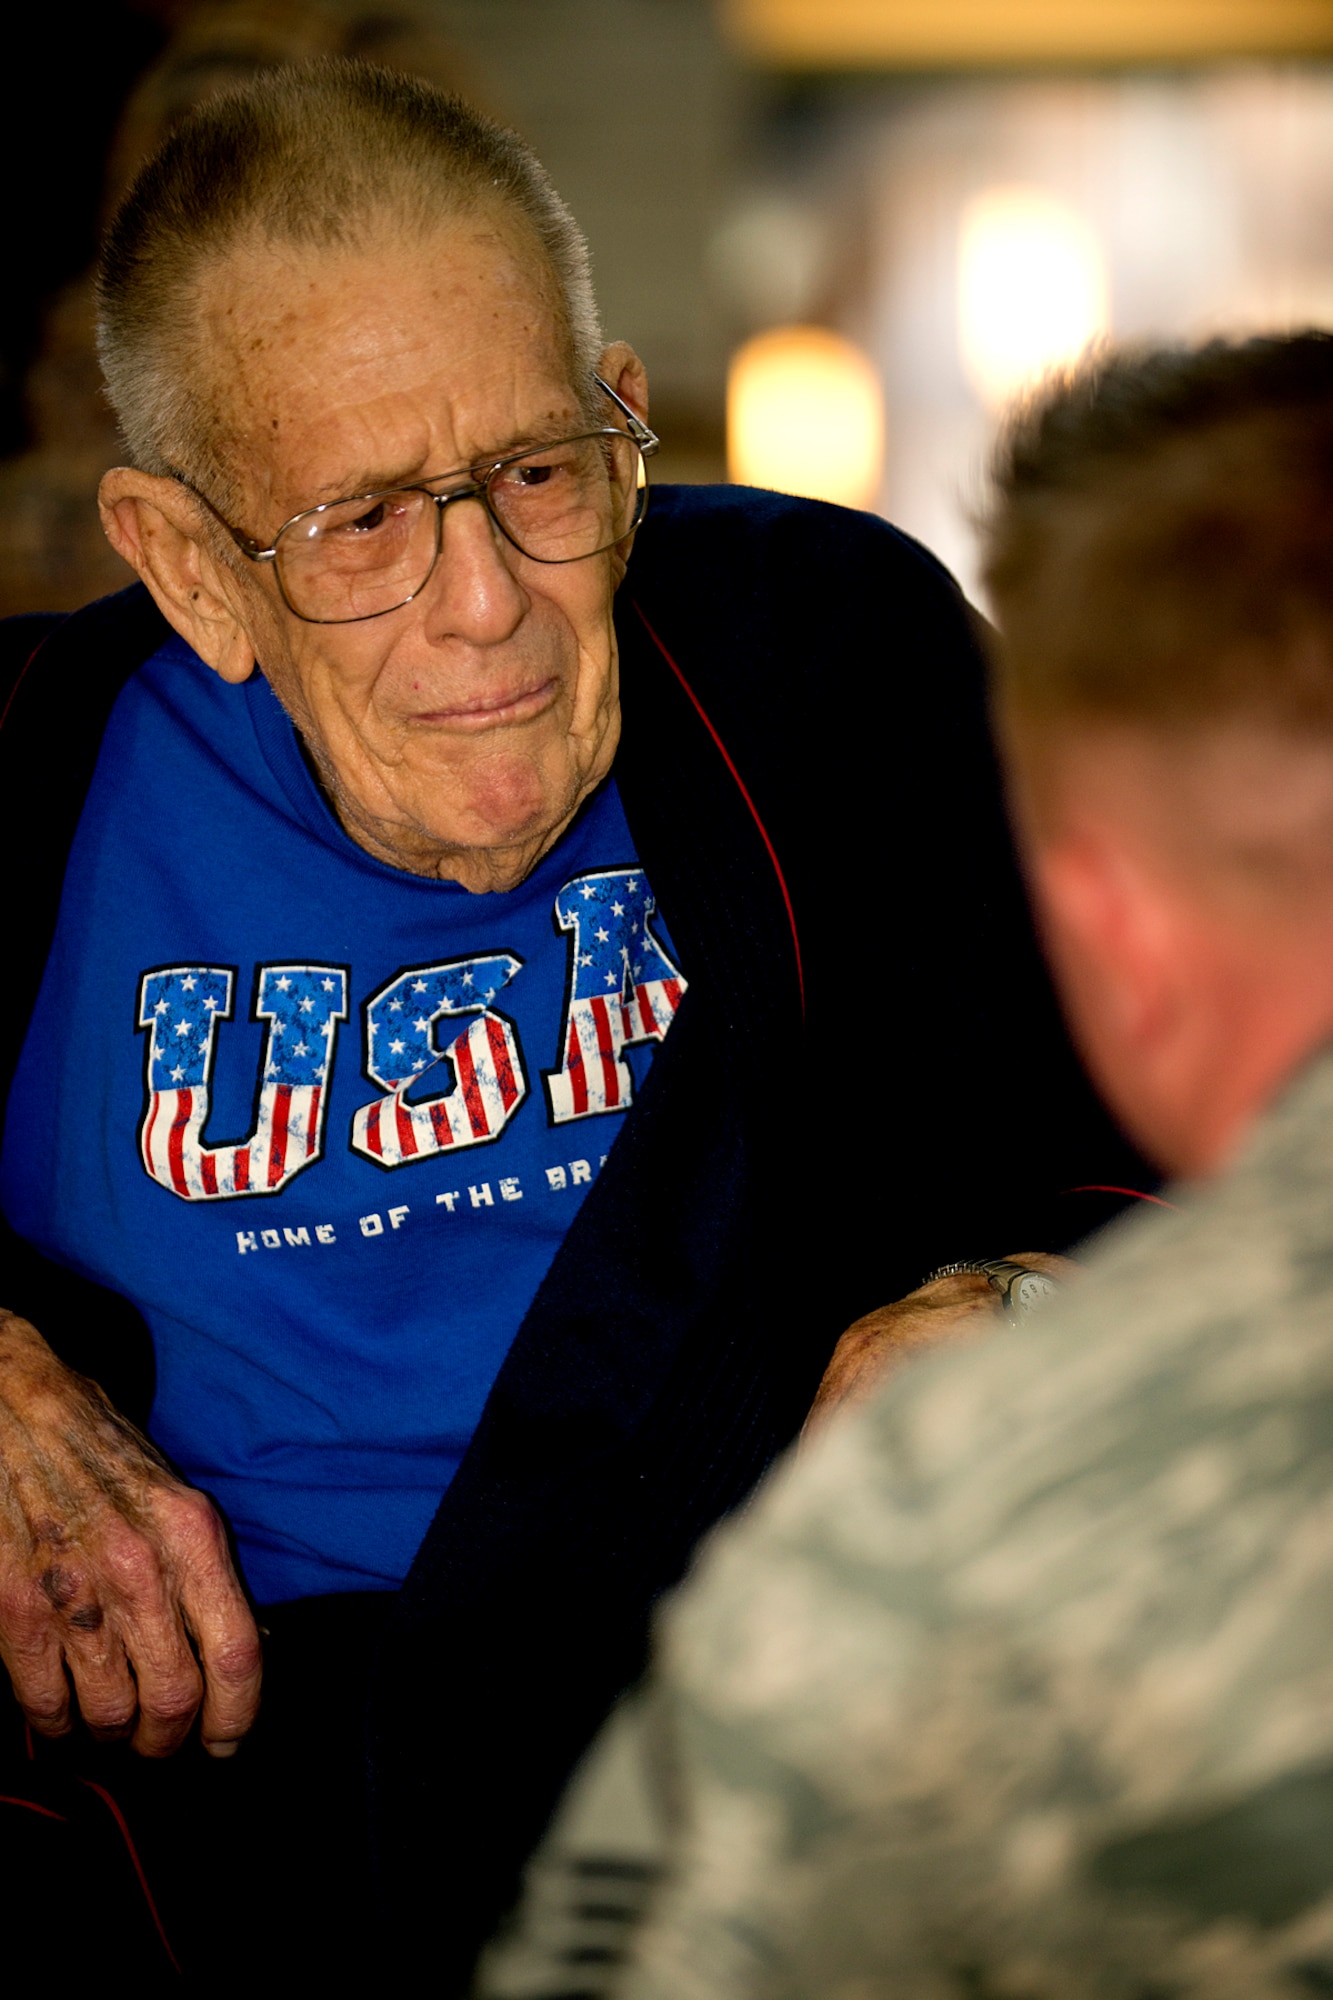 Stephen Ward, a Korean War veteran and resident of the Northwest Louisiana War Veterans Home, becomes emotional while talking to U.S. Air Force Master Sgt. Steve Wilson, Nov. 6, 2012, Bossier City, La. Wilson is a member of the U.S. Air Force Band of the West and his ensemble performed at the veterans home in addition to supporting the Global Strike Challenge score posting held on Barksdale Air Force Base, La. (U.S. Air Force photo by Master Sgt. Greg Steele/Released)